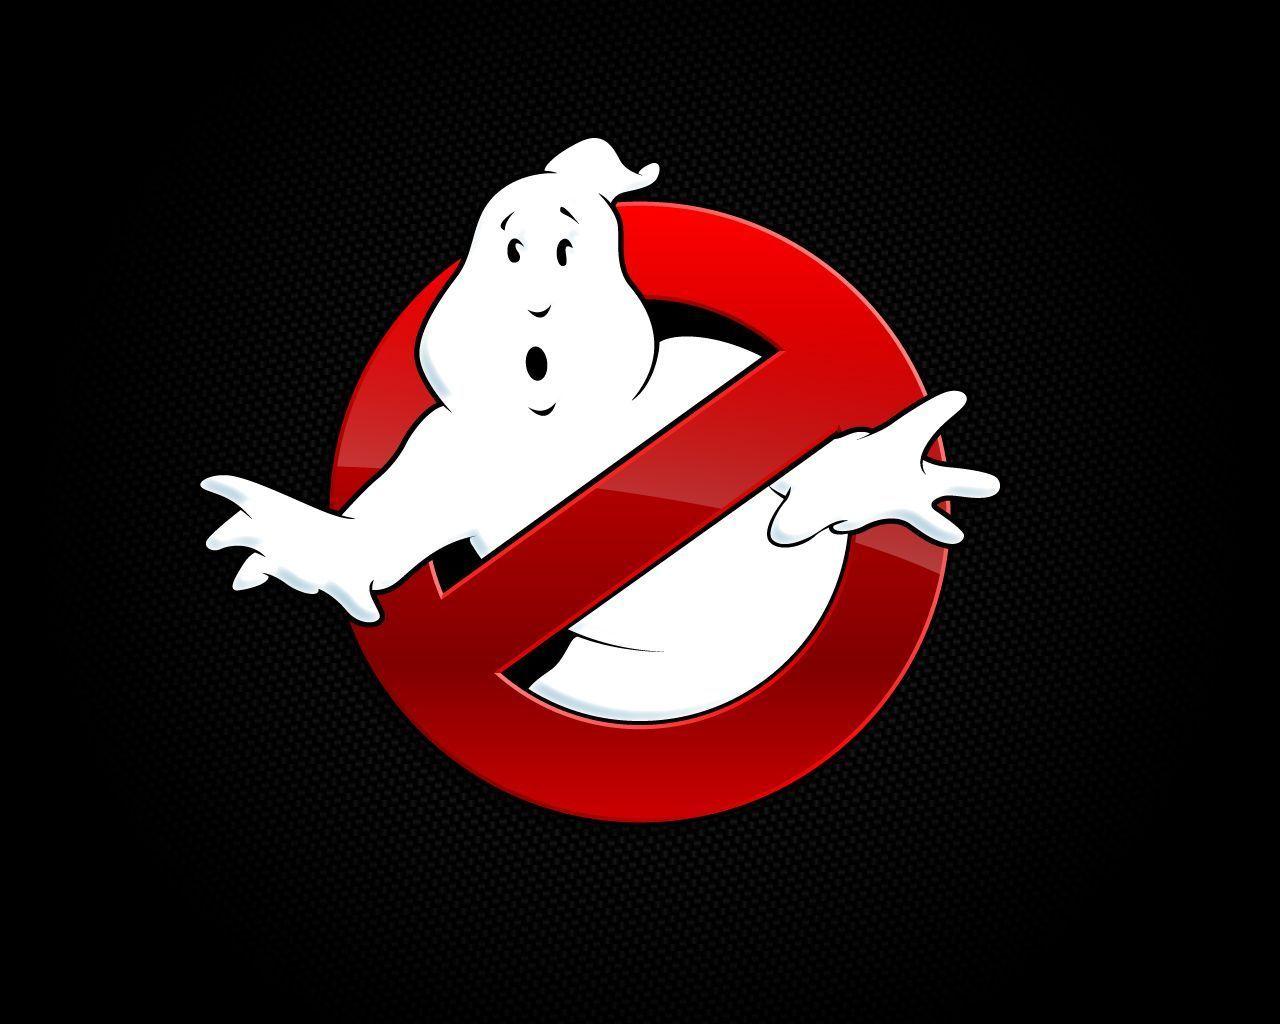 Download Ghostbusters Ecto Wallpaper 1280x720 #